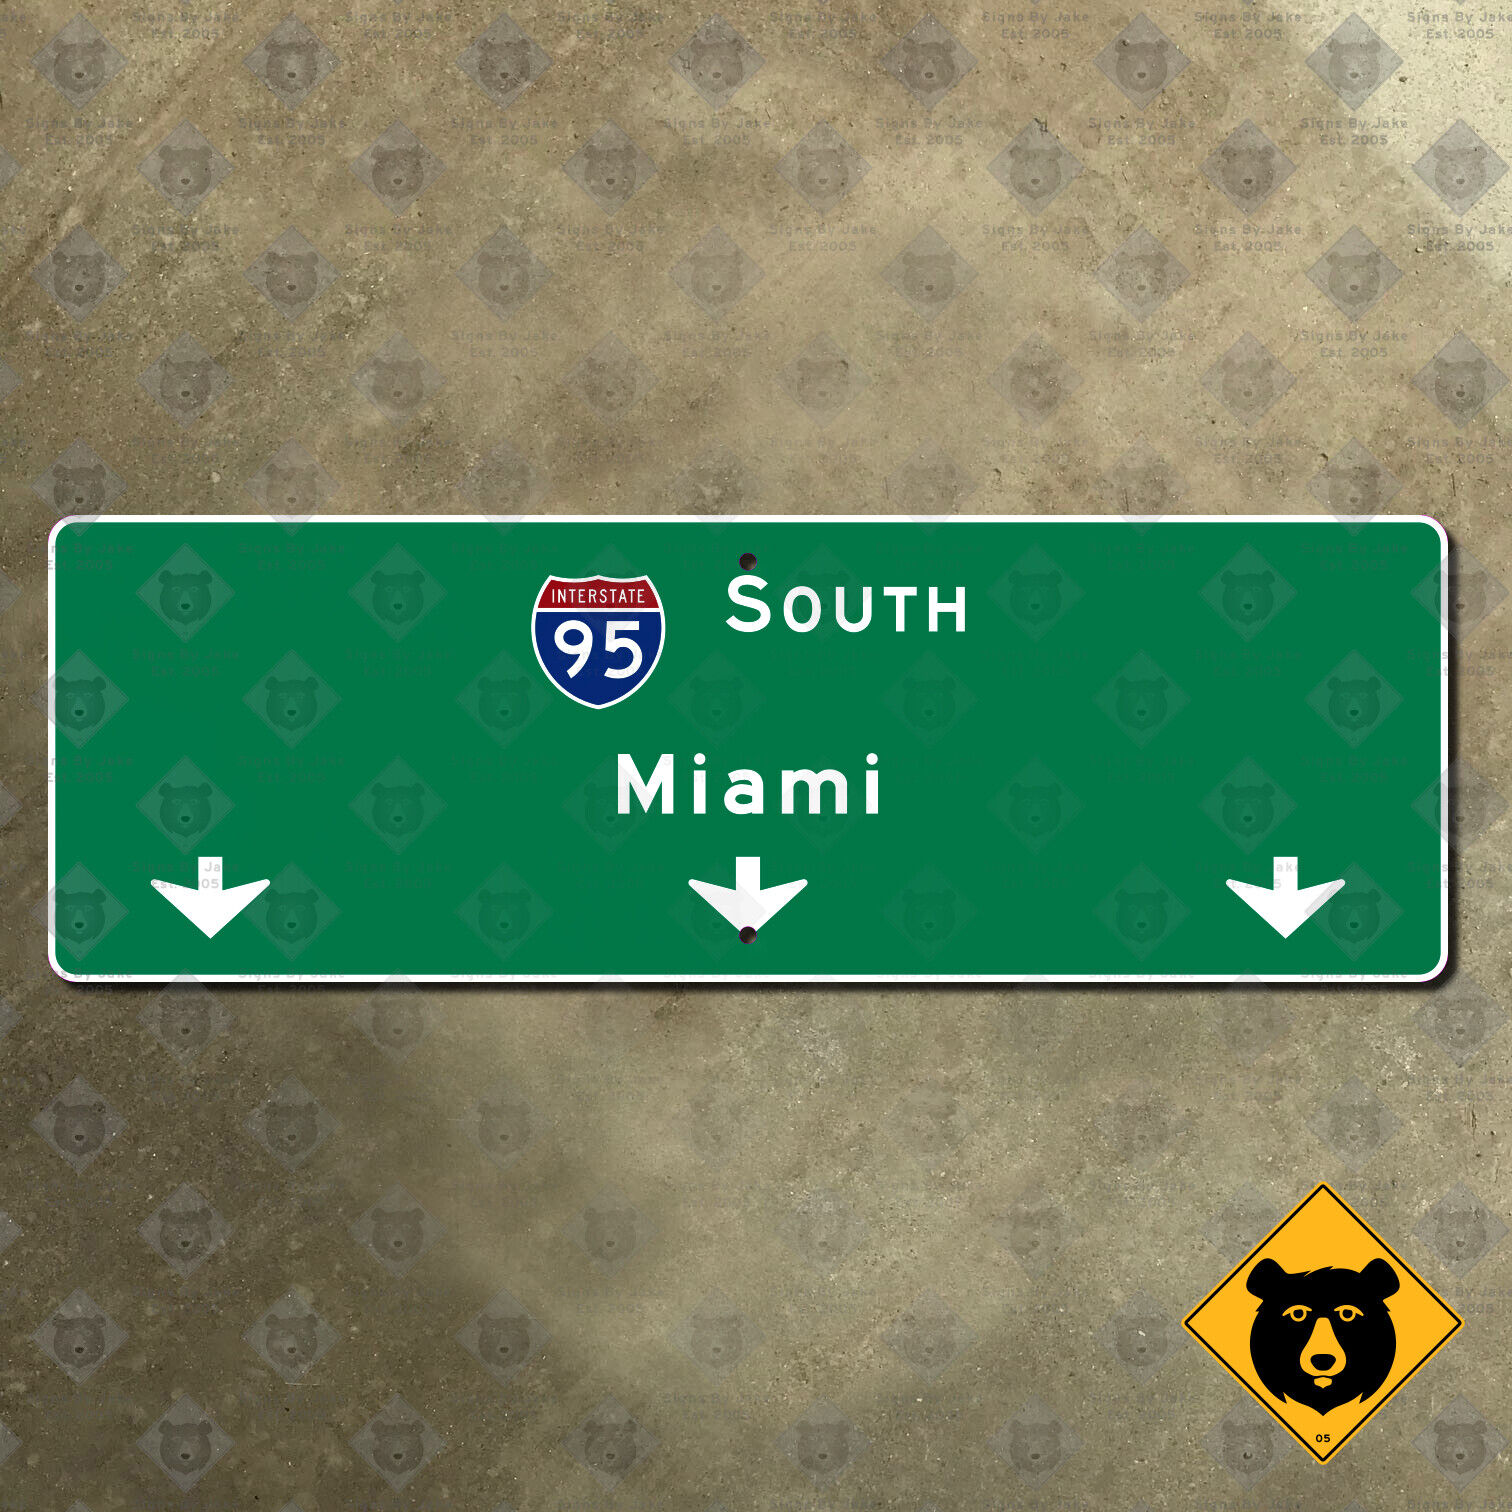 Florida interstate 95 south Miami freeway overhead highway guide sign 2009 30x10